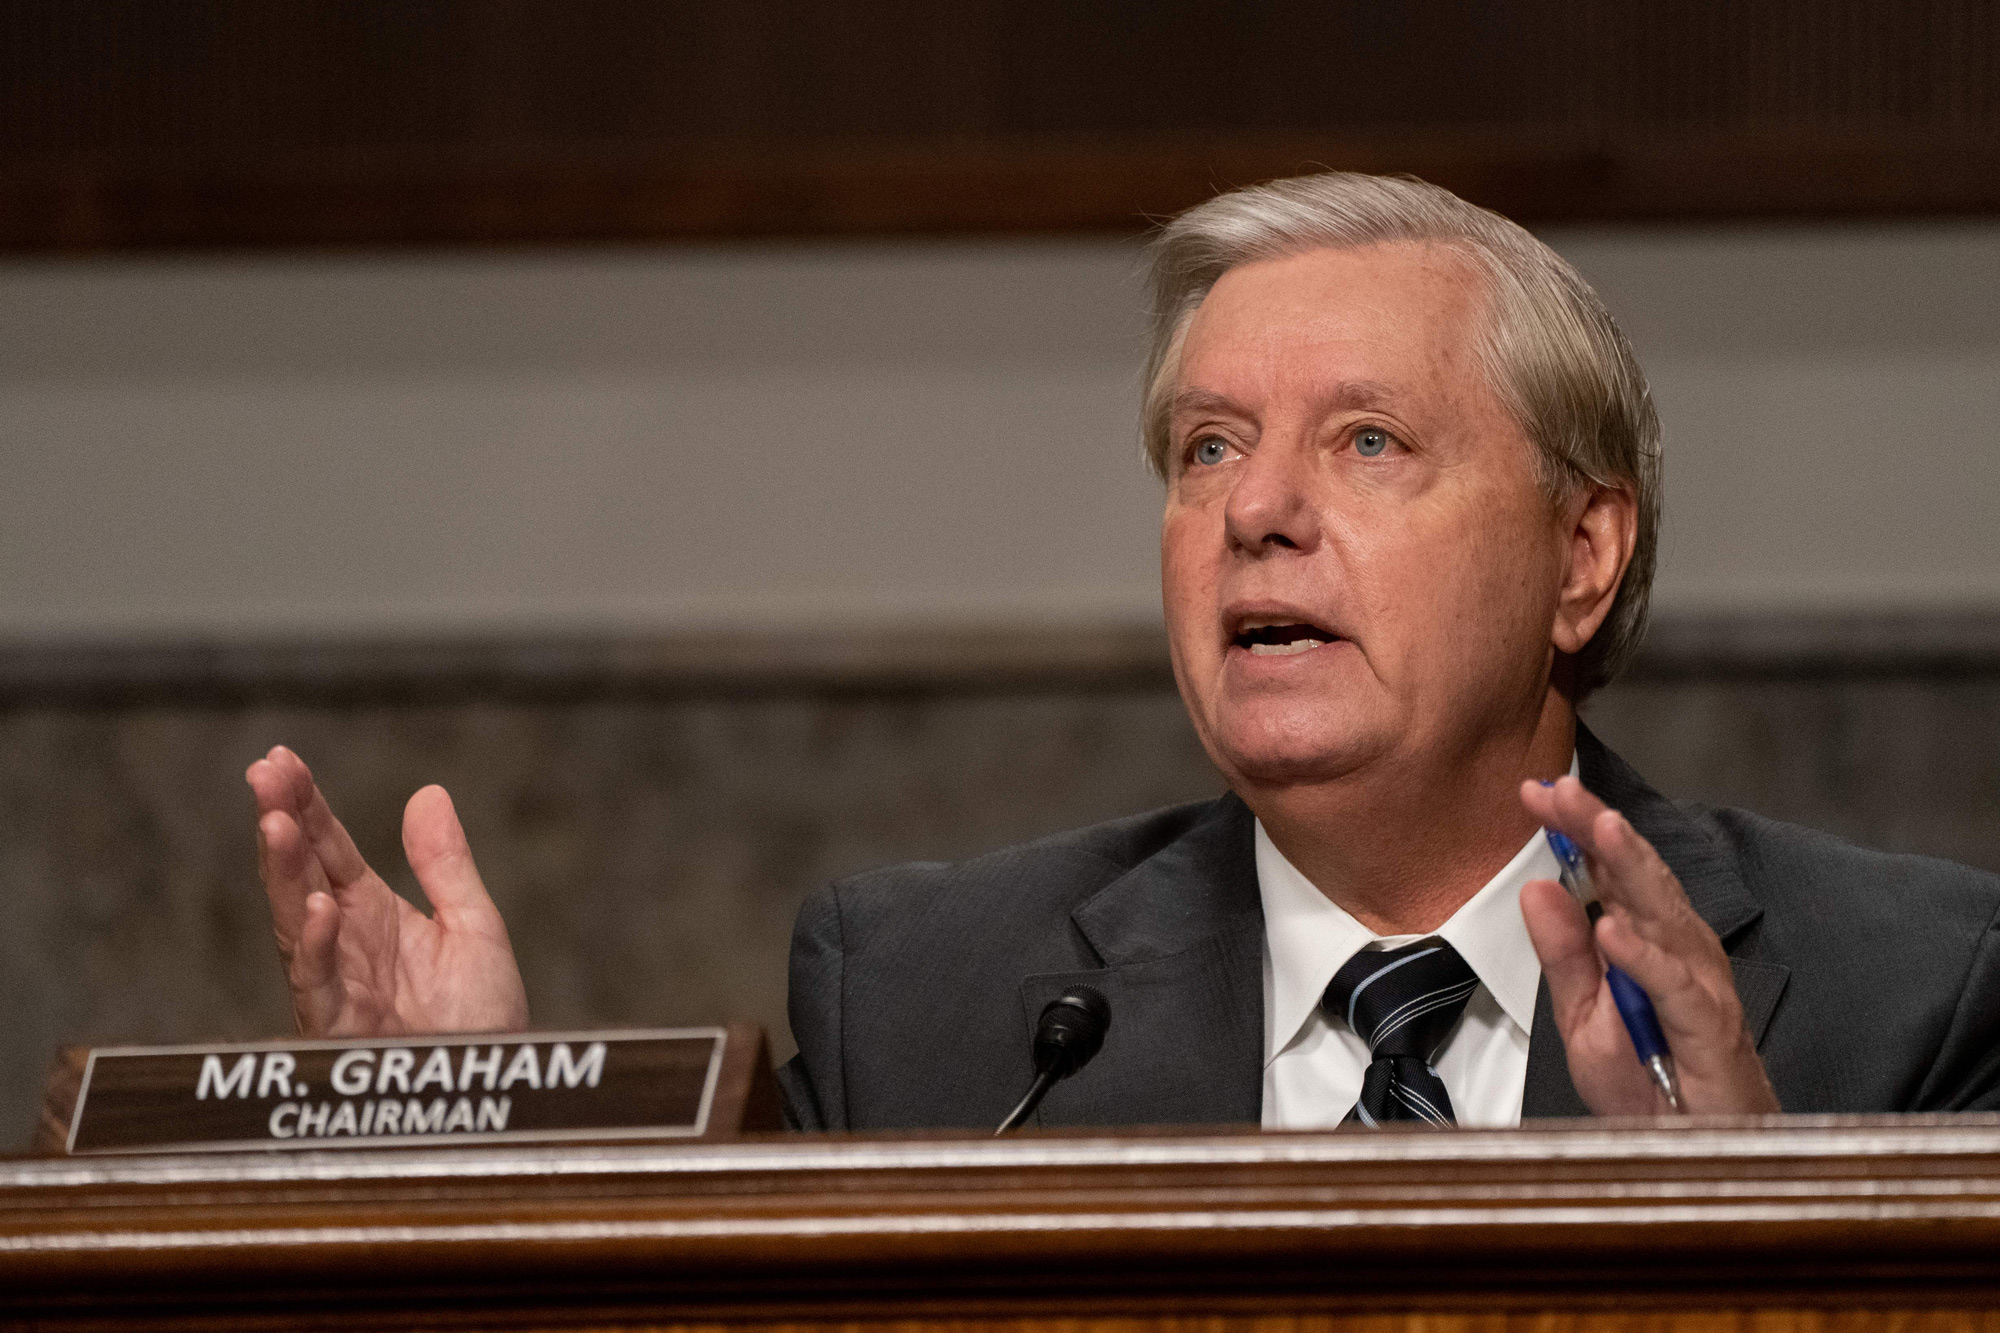 Sen. Lindsey Graham speaks during an oversight hearing to examine the Crossfire Hurricane Investigation in Washington, DC, on September 30.